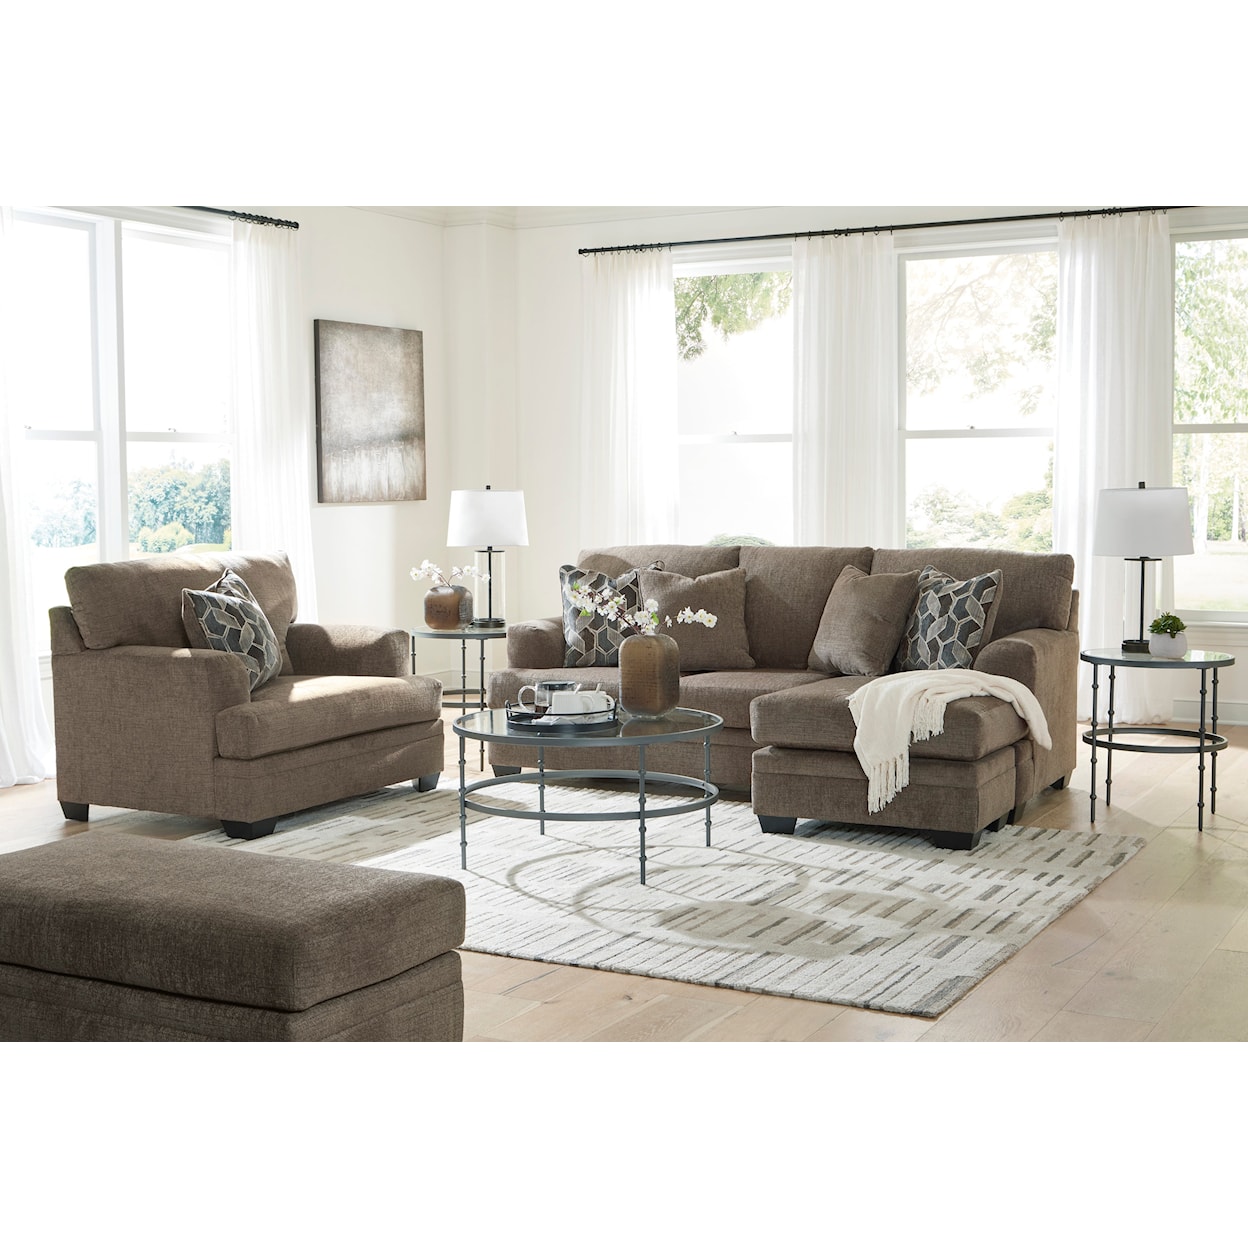 Michael Alan Select Stonemeade Sofa Chaise, Oversized Chair and Ottoman